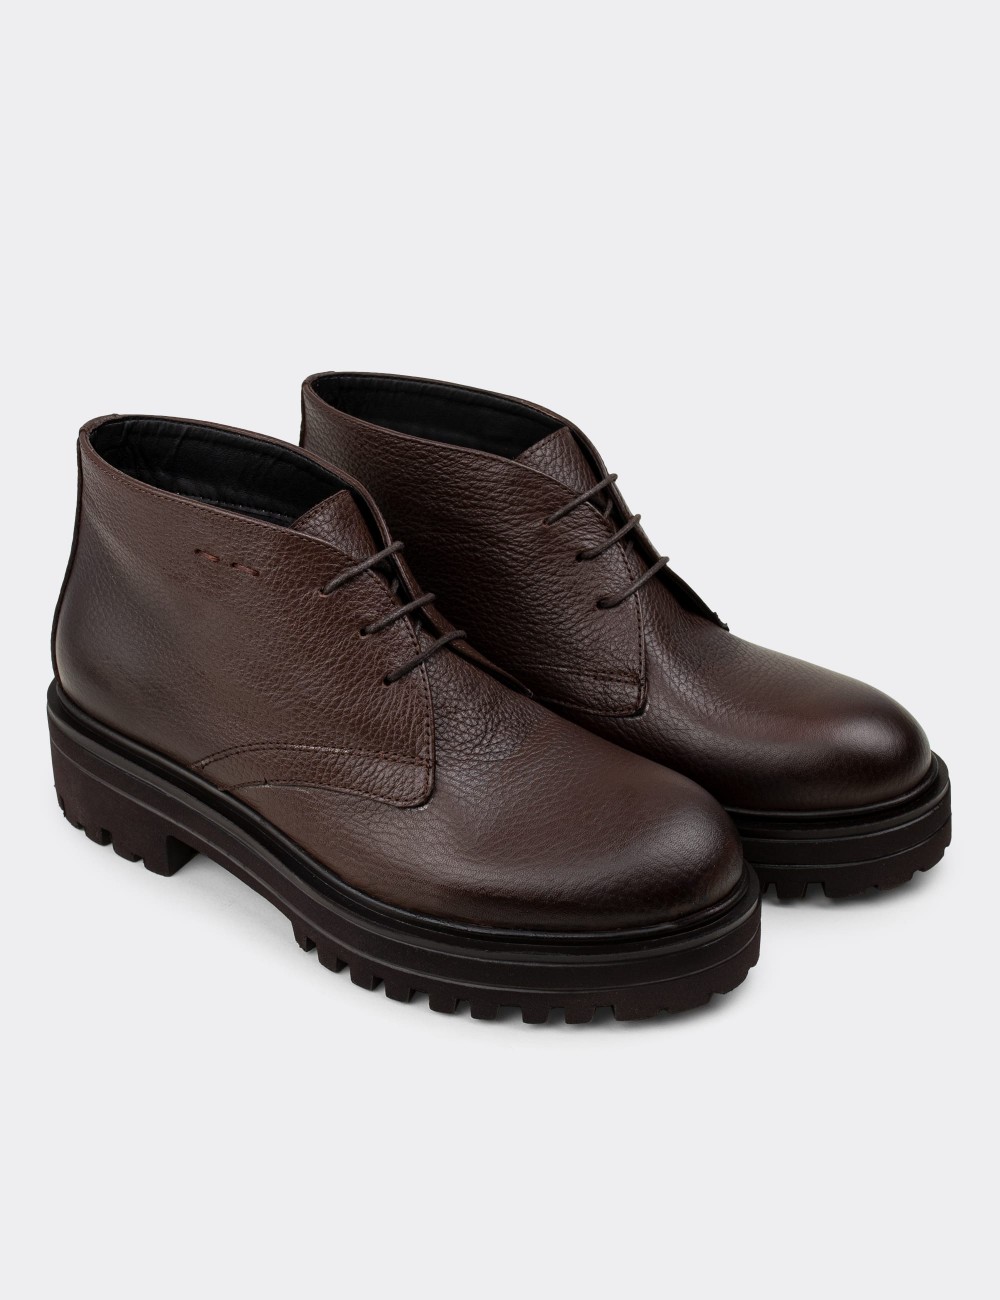 Brown  Leather Desert Boots - 01847ZKHVE01